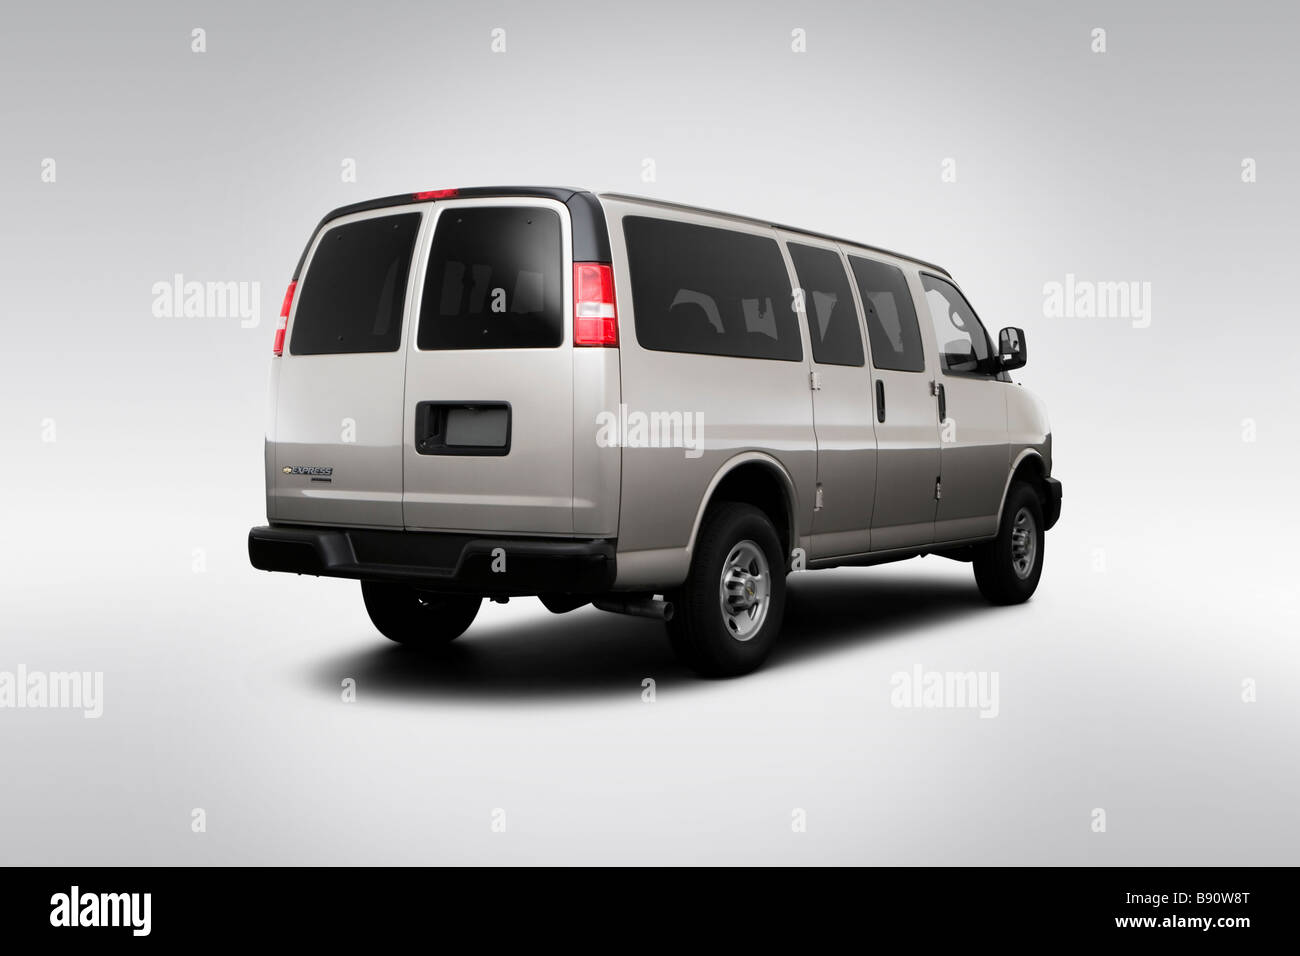 2009 Chevrolet Express 2500 in Silver - Rear angle view Stock Photo